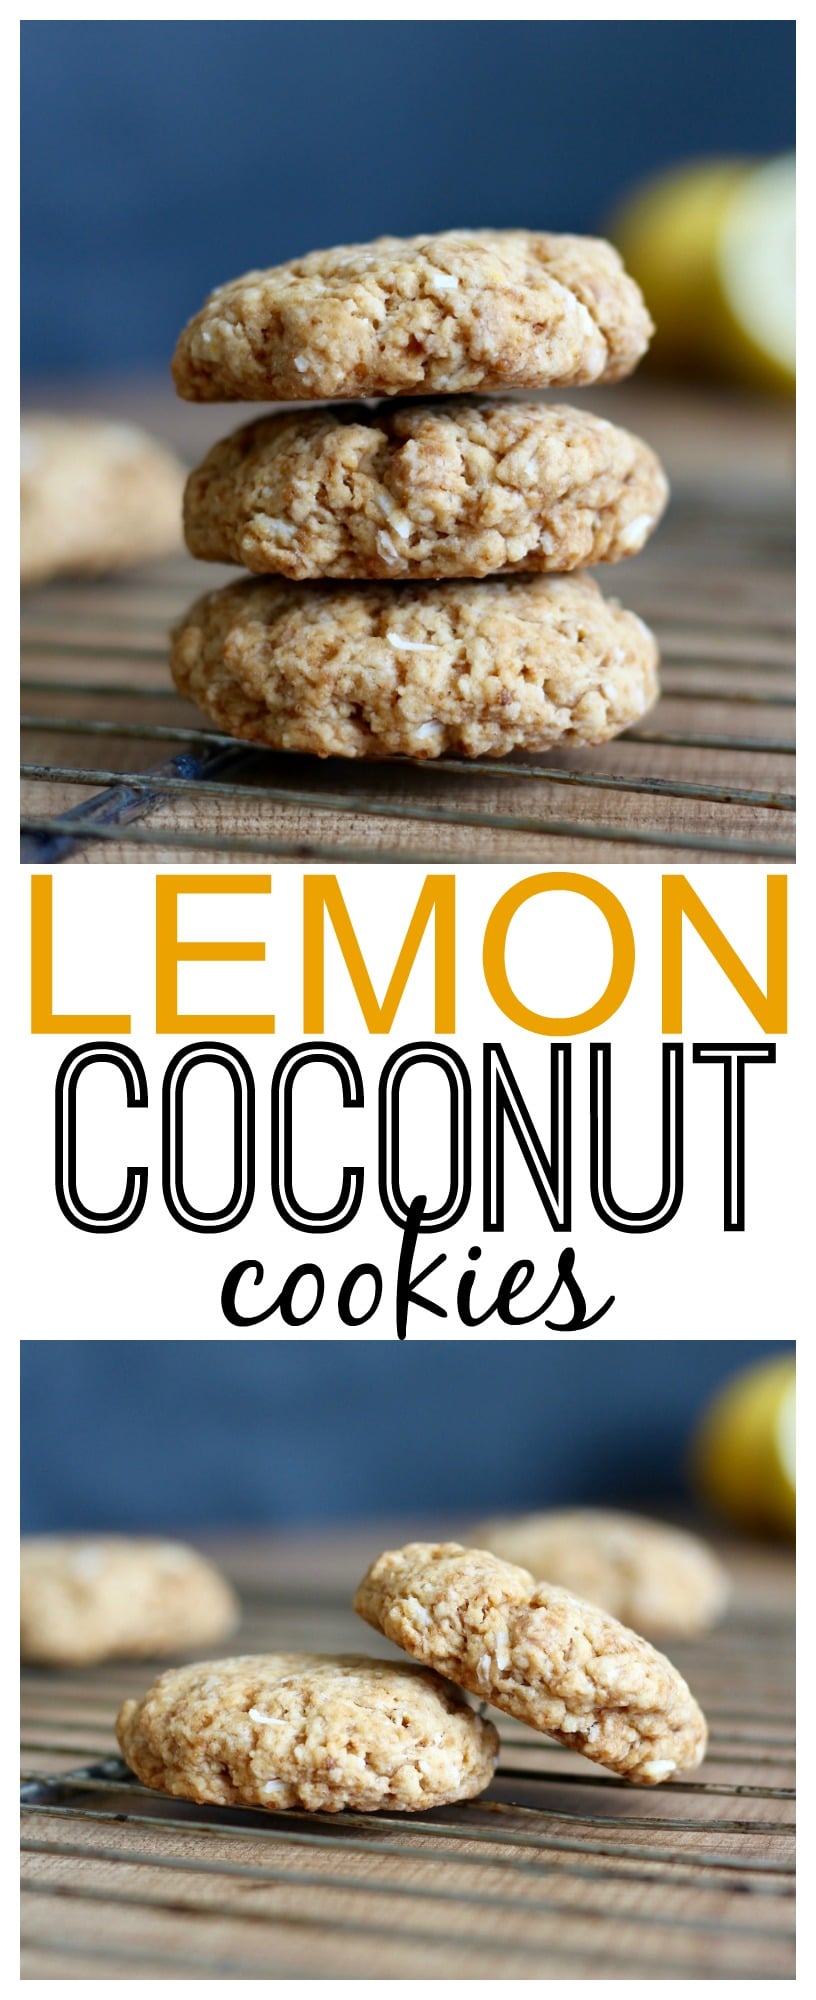 THE EASIEST Vegan Lemon Coconut Cookies! These cookies are loved in our house. They're zesty and chewy and made without any dairy or eggs. YUM!